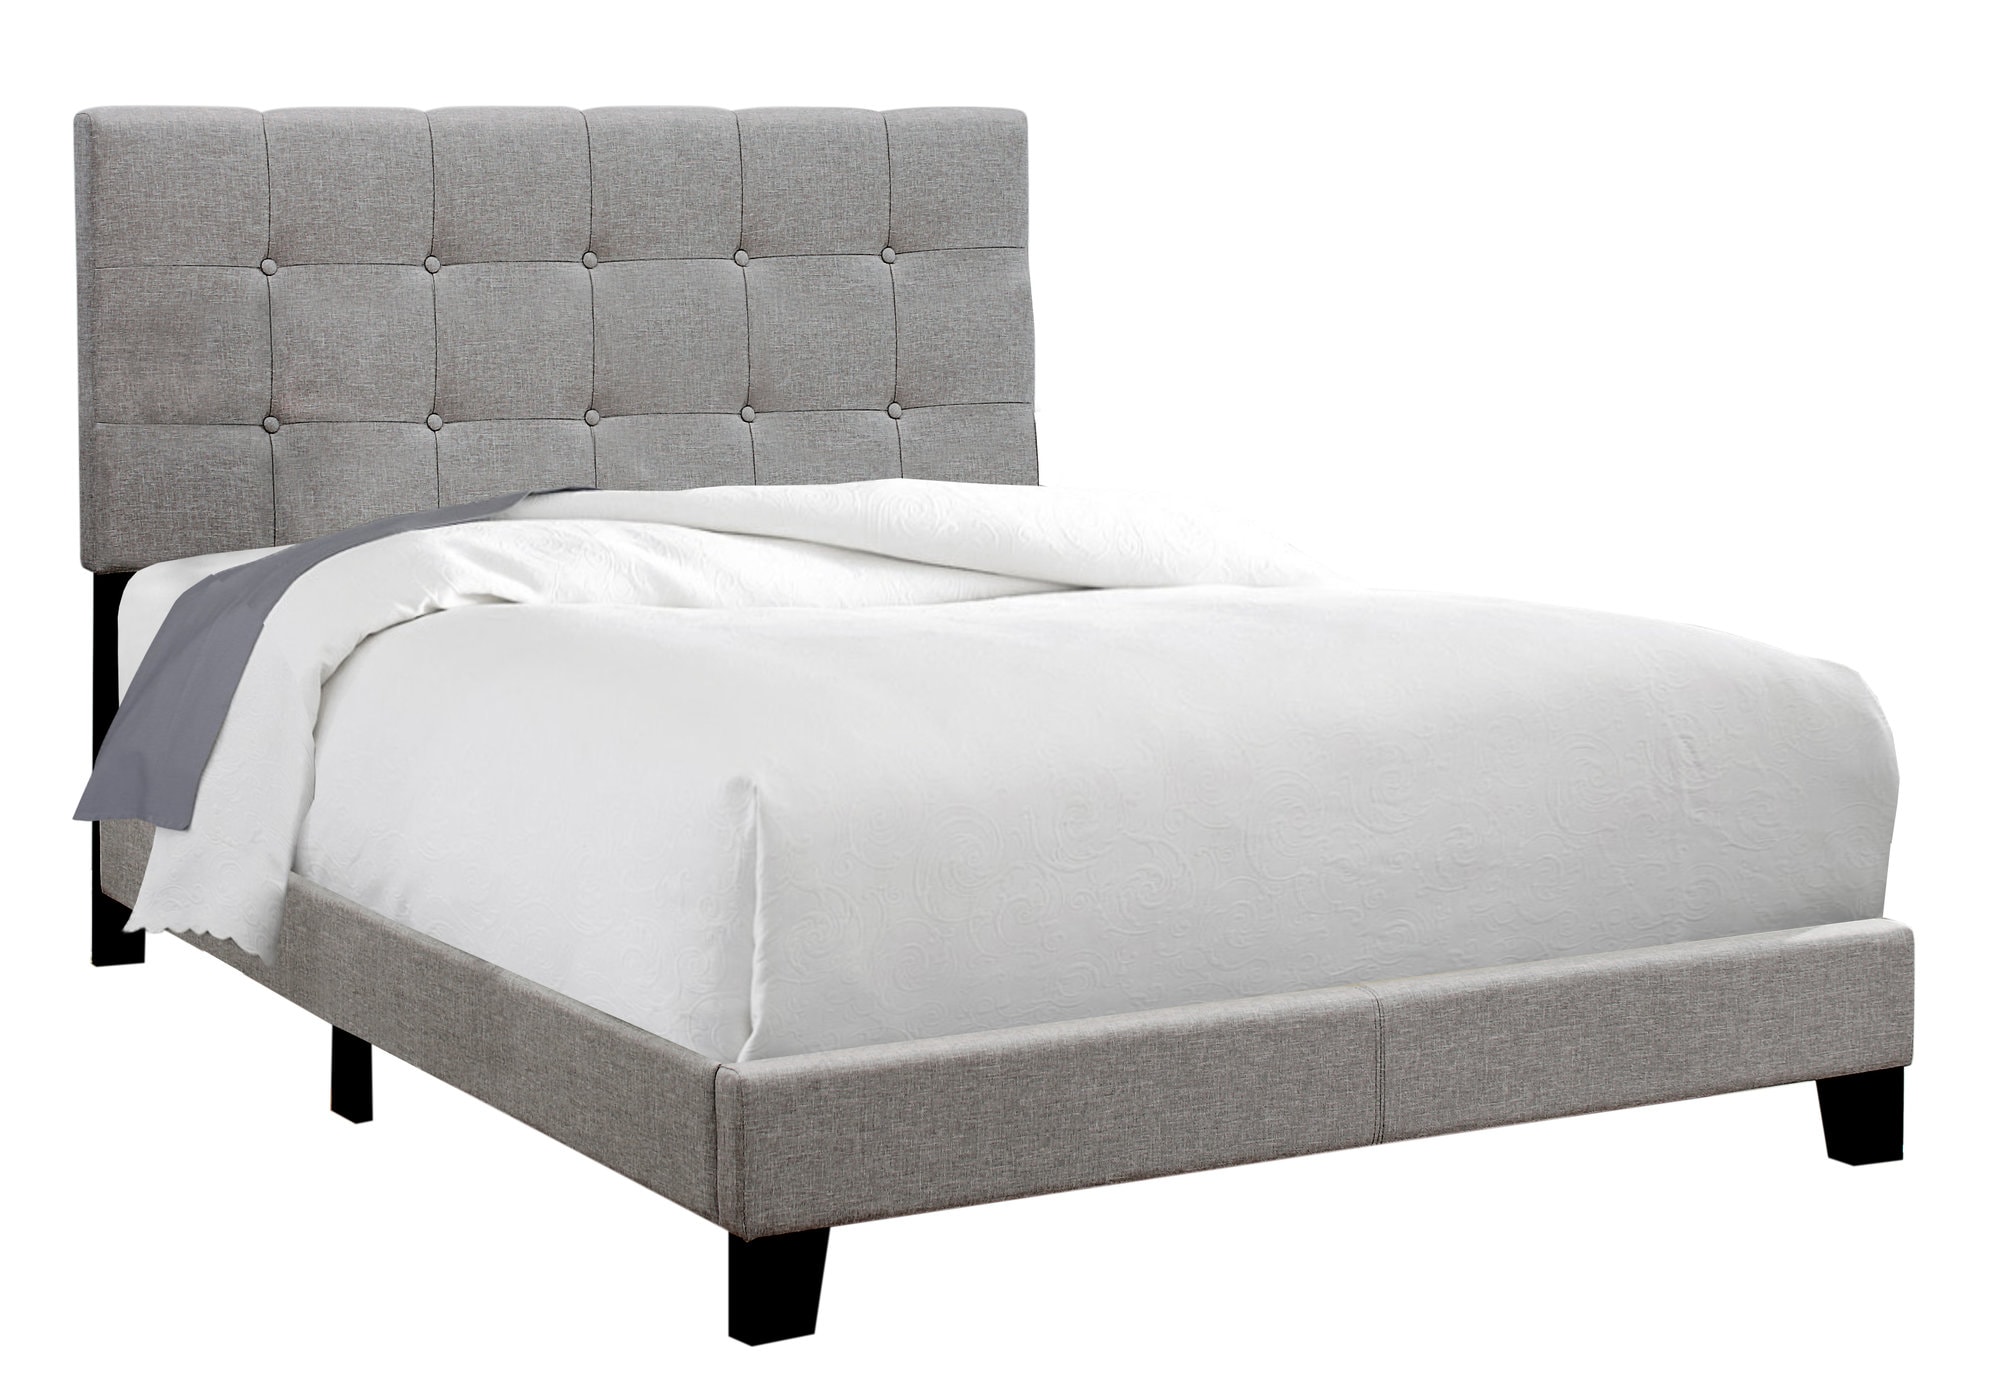 Monarch Specialties Bed Full Size, Grey Bed Frame Full